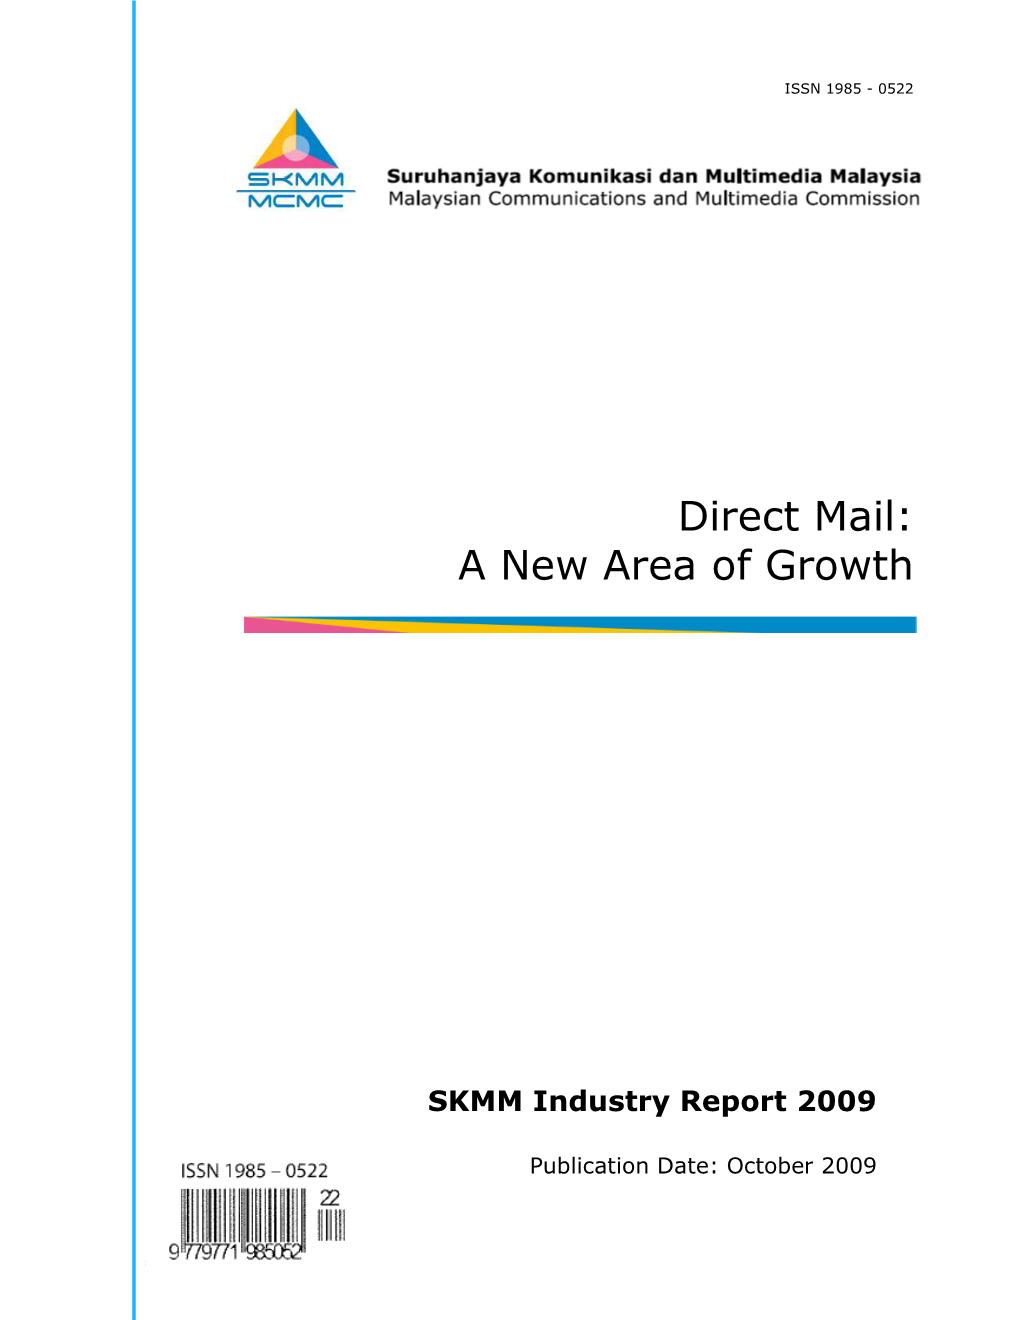 Direct Mail: a New Area of Growth